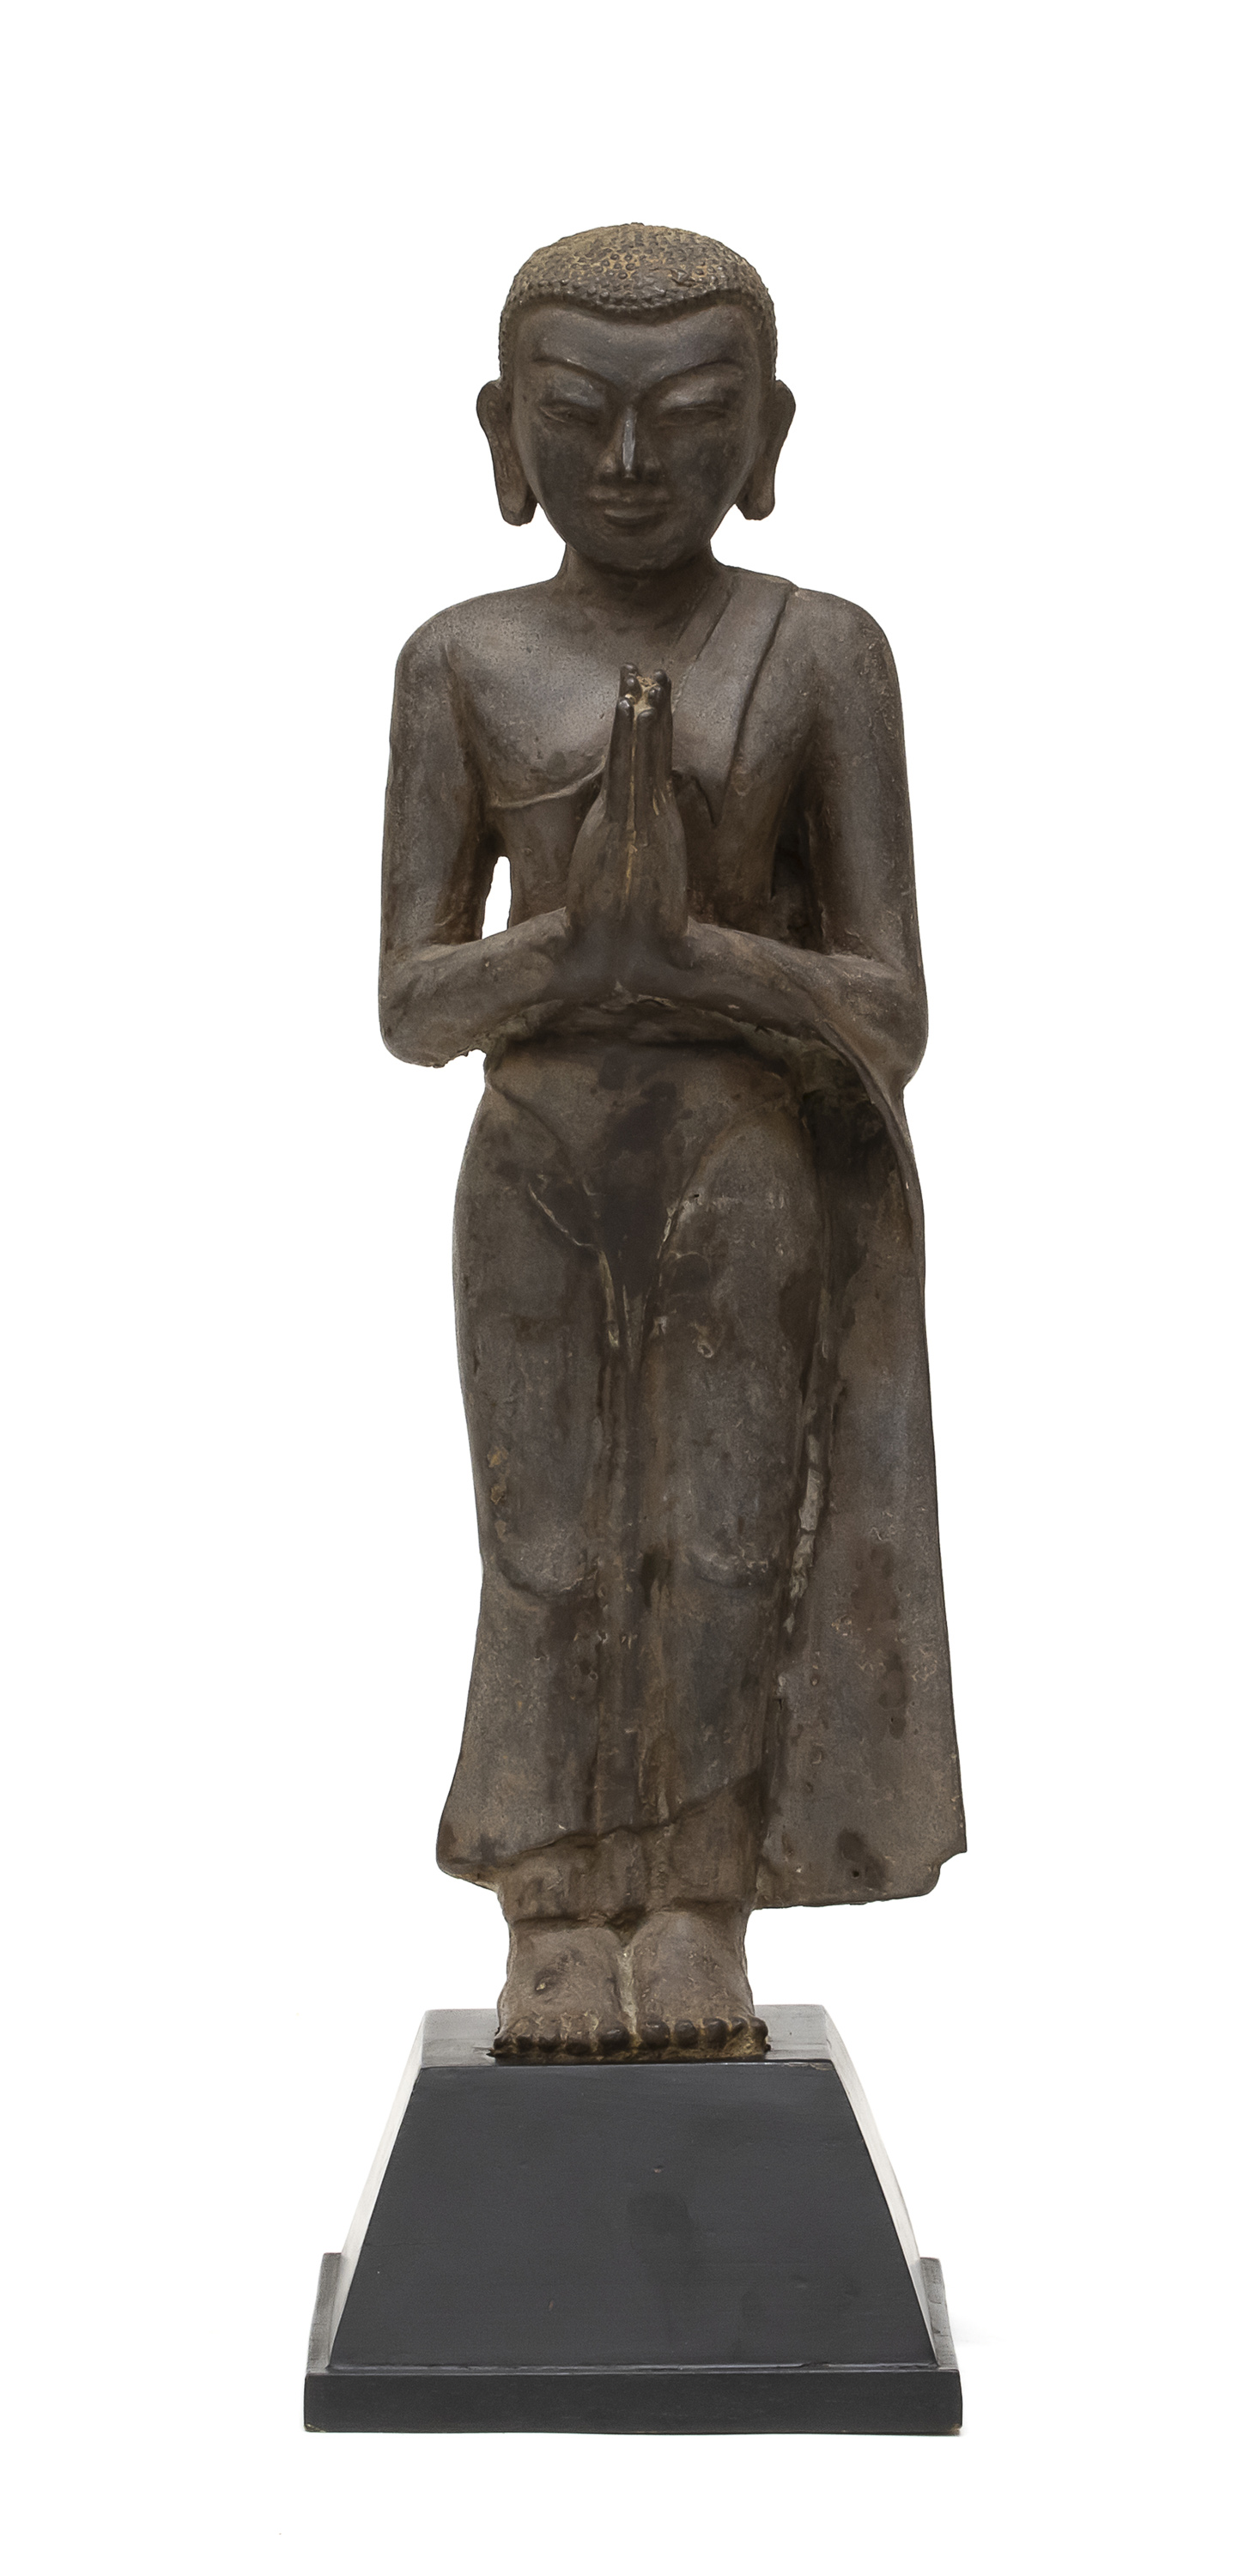 A CAMBODIAN BURNISHED BRONZE SCULPTURE OF BUDDHA. EARLY 20TH CENTURY.